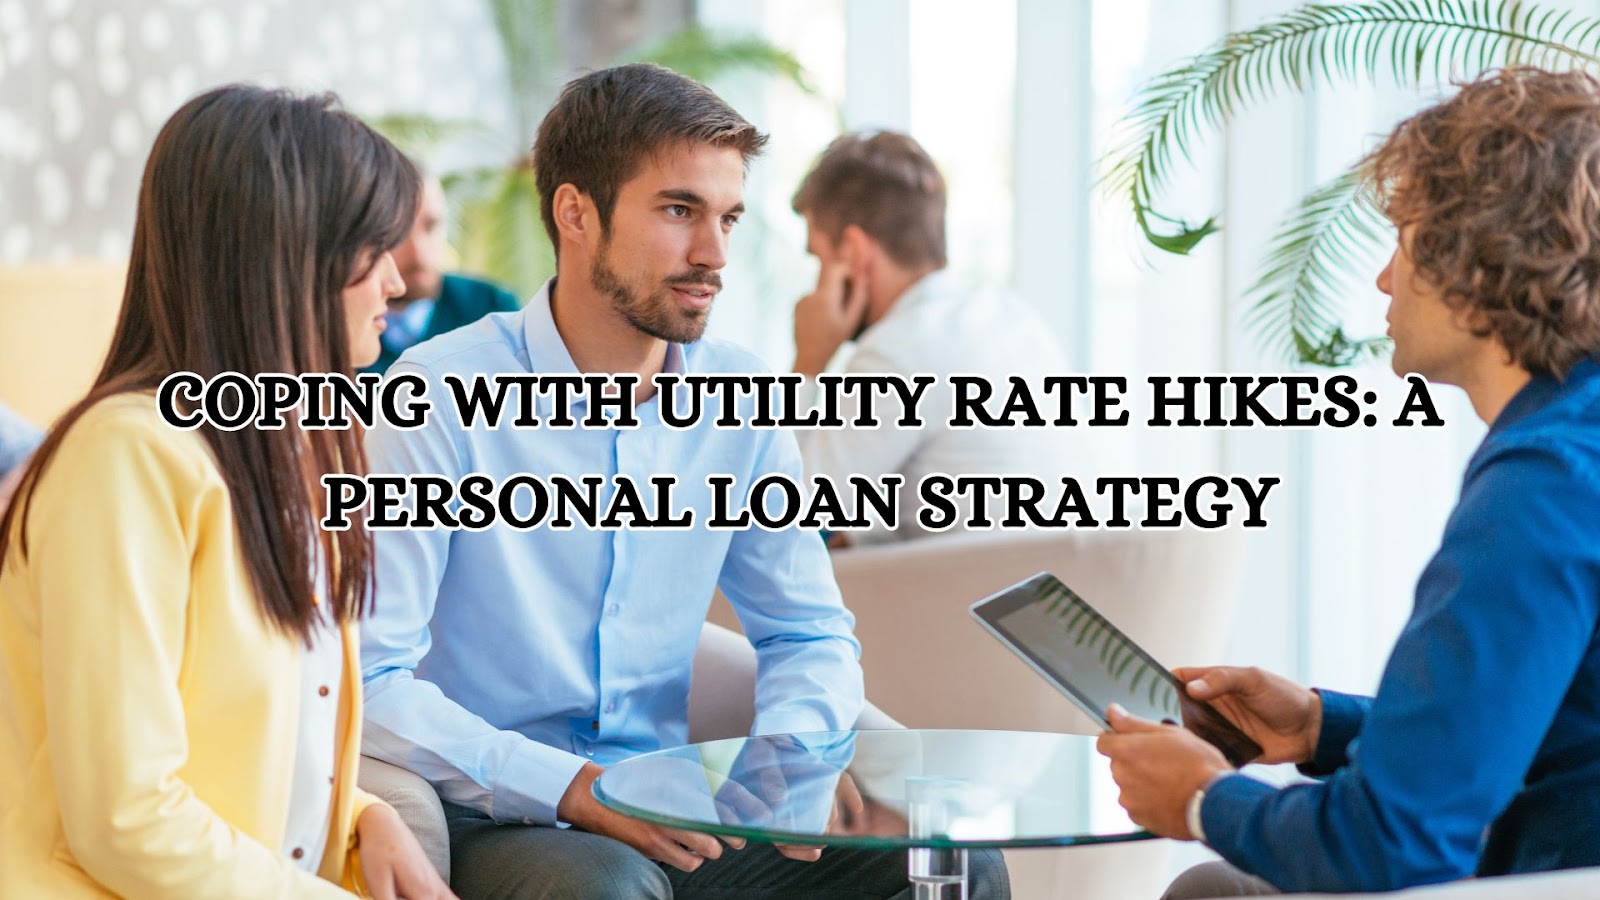 Coping with Utility Rate Hikes: A Personal Loan Strategy